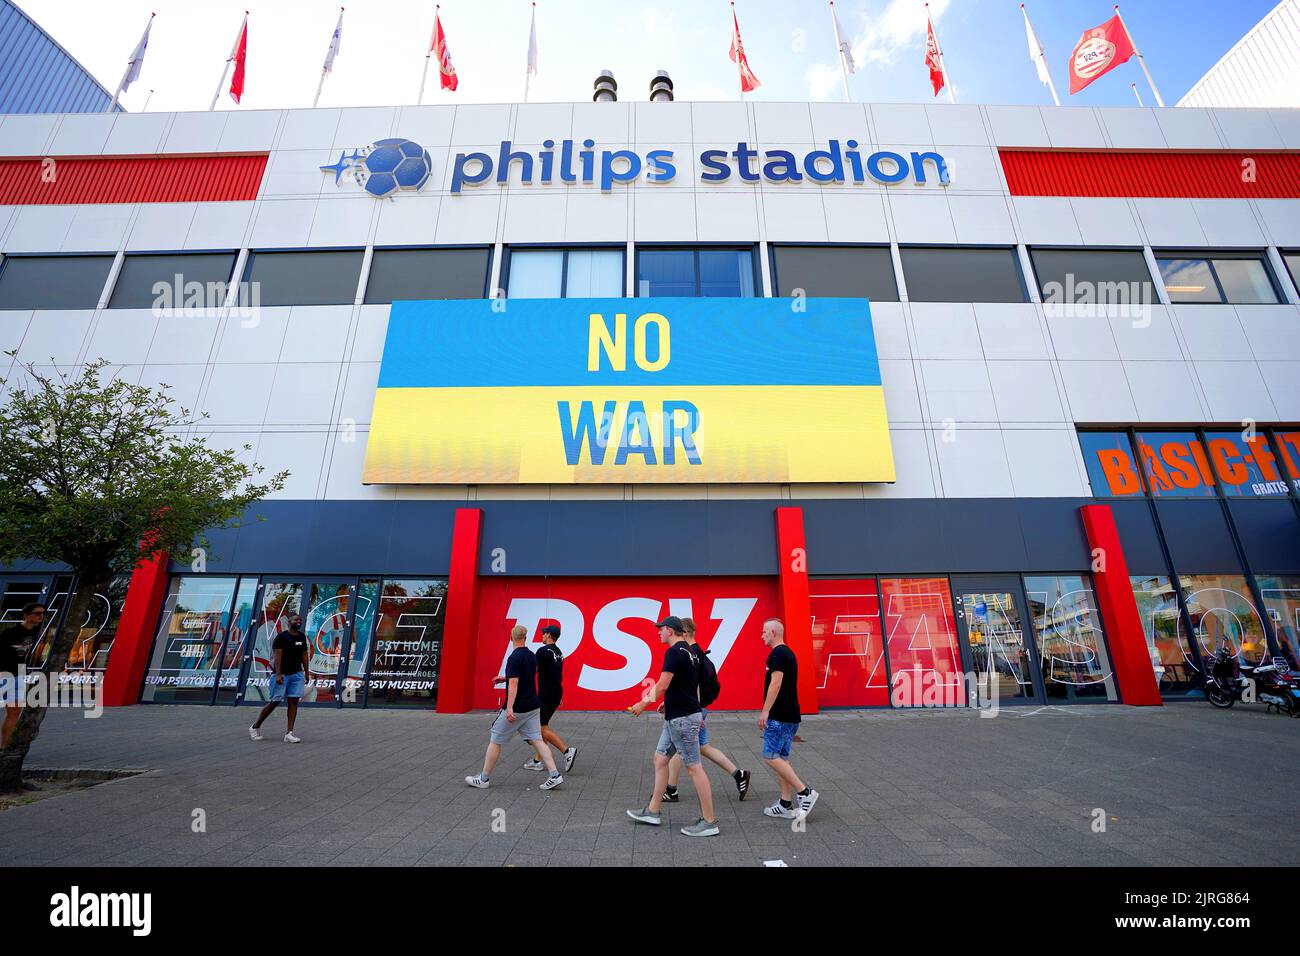 A message in support of Ukraine is displayed on screen ahead of the UEFA Champions League qualifying match at PSV Stadion, Eindhoven. Picture date: Wednesday August 24, 2022. Stock Photo